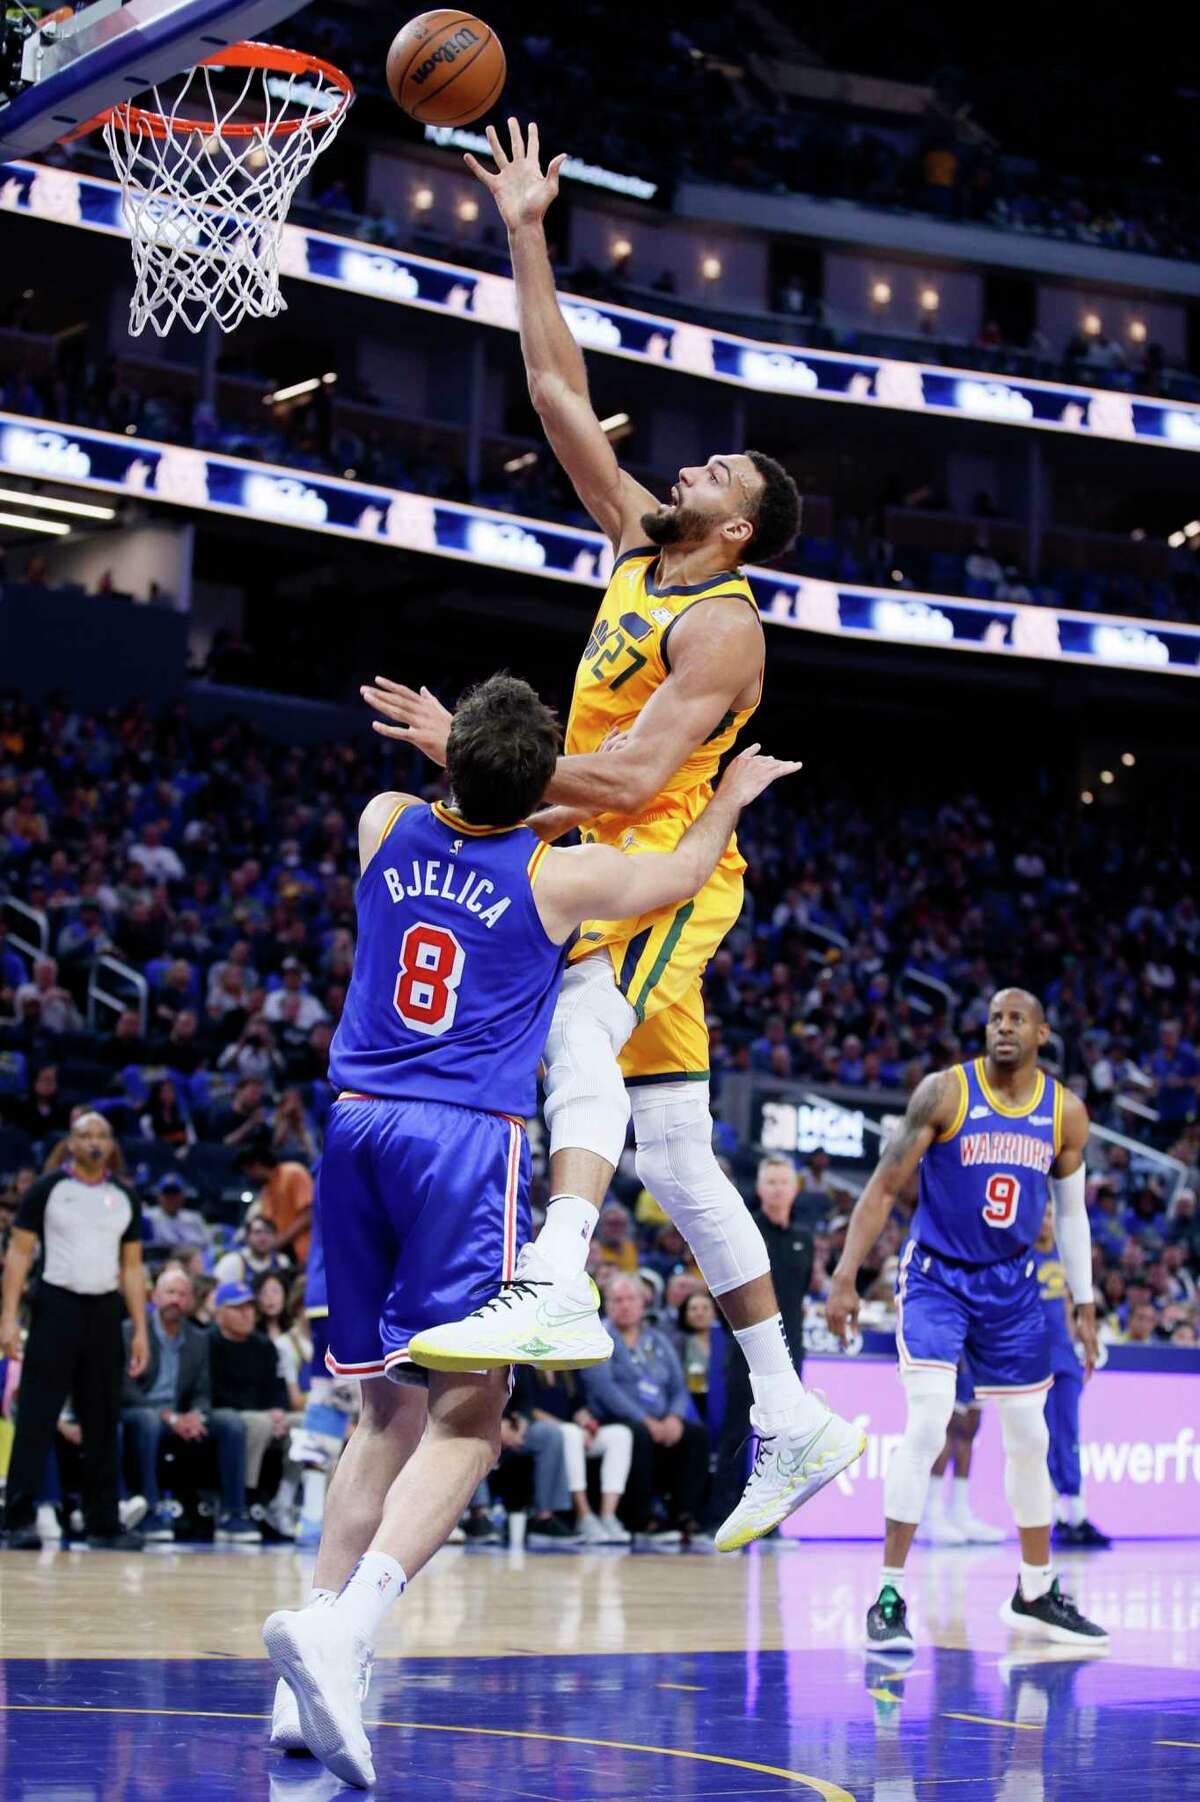 Utah Jazz center Rudy Gobert (27) scores against Golden State Warriors forward Nemanja Bjelica (8) in the first half of an NBA game at Chase Center, Saturday, April 2, 2022, in San Francisco, Calif.